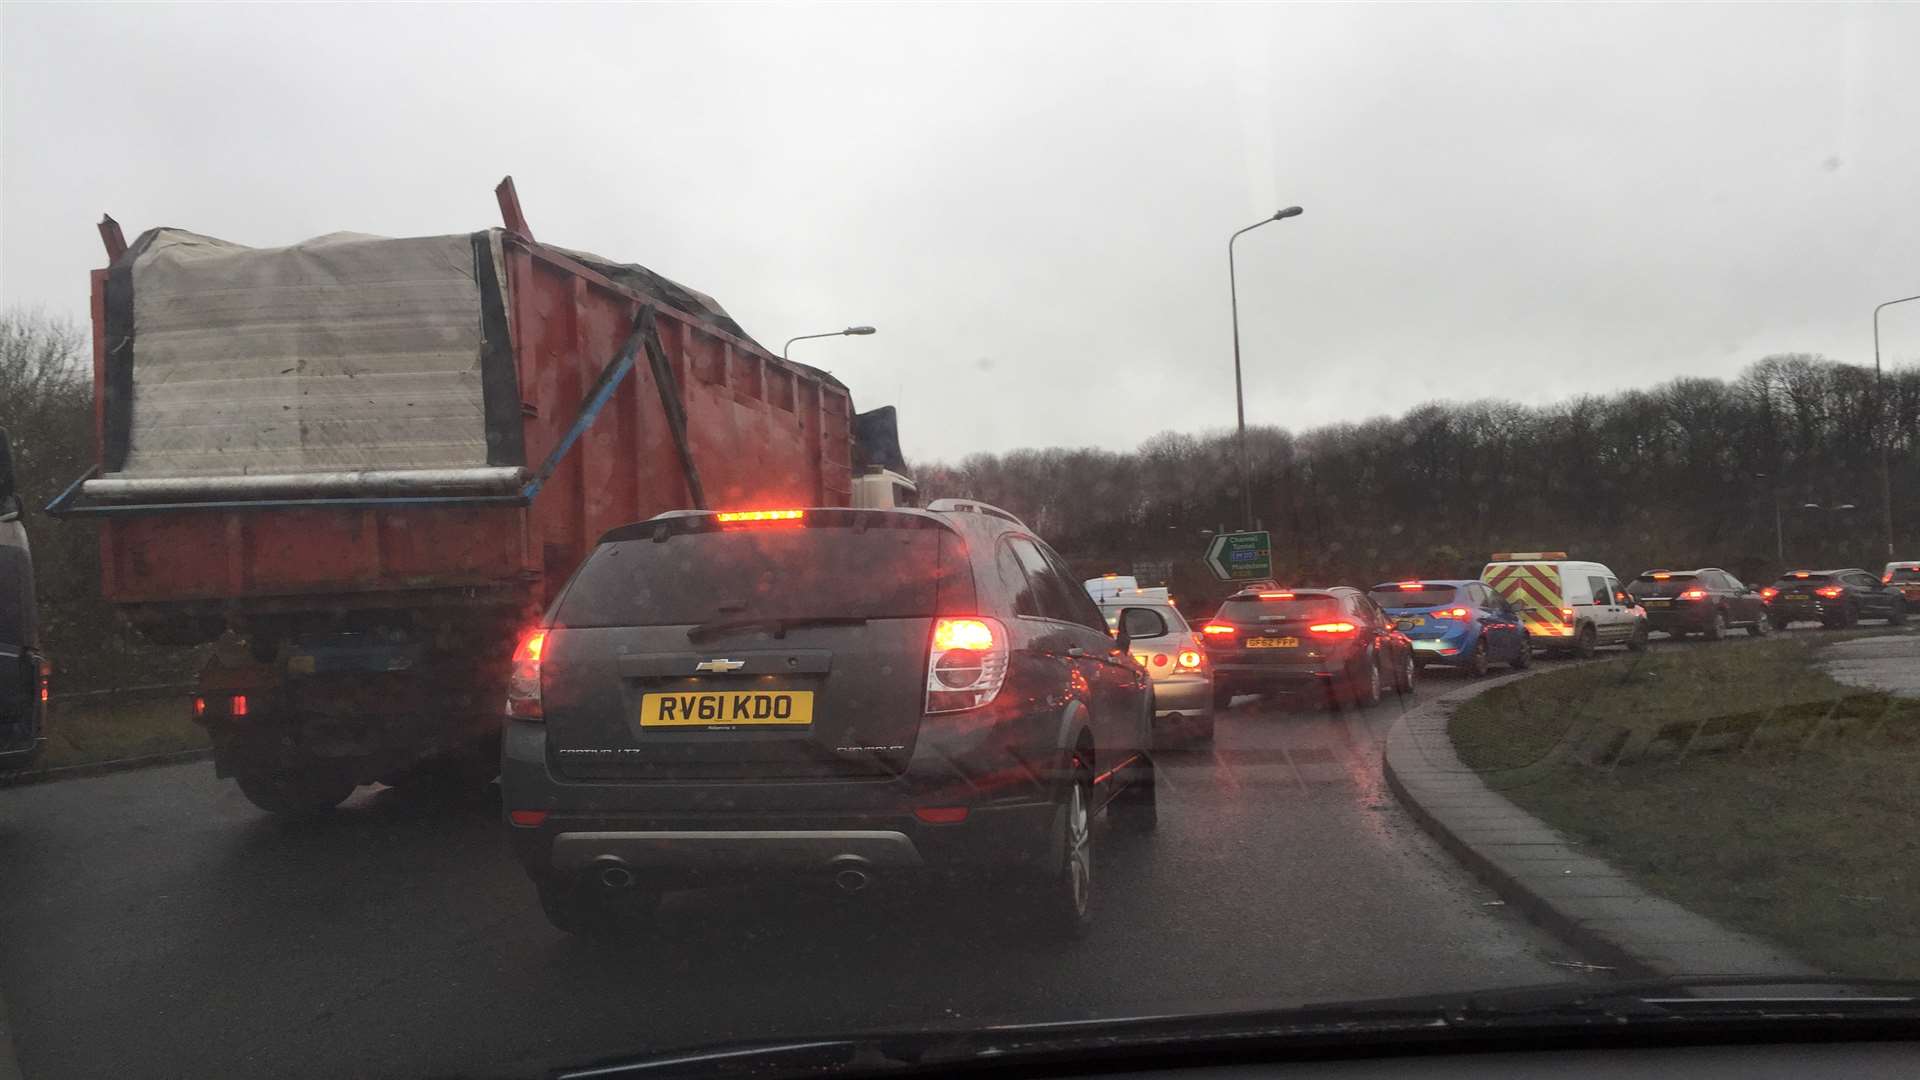 The area is gridlocked, pictures, Steve Salter.